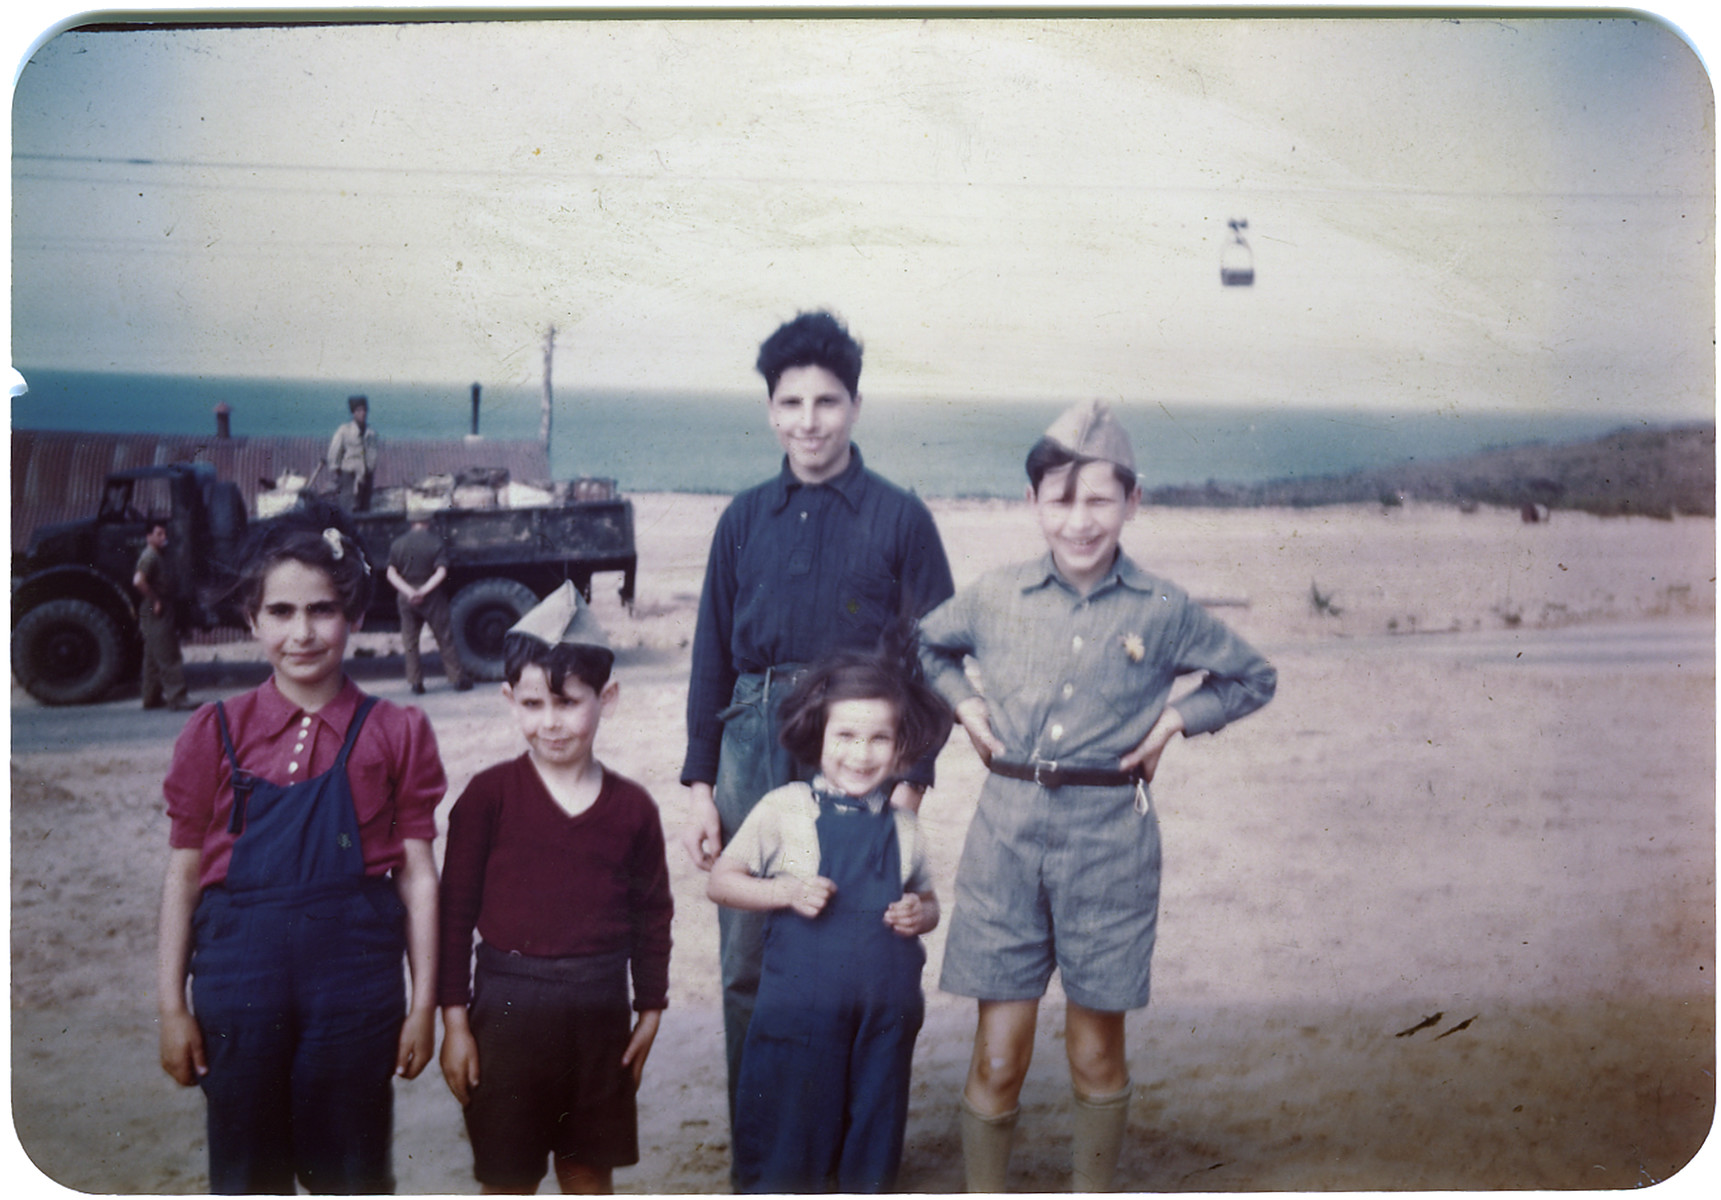 Group portrait of Jewish children in the Jeanne d'Arc camp in Phillippeville who were sent their following their release from Bergen-Belsen in a prisoner exchange.

Hans Abraham is on the far right, and Ruth Abraham is in the front right.